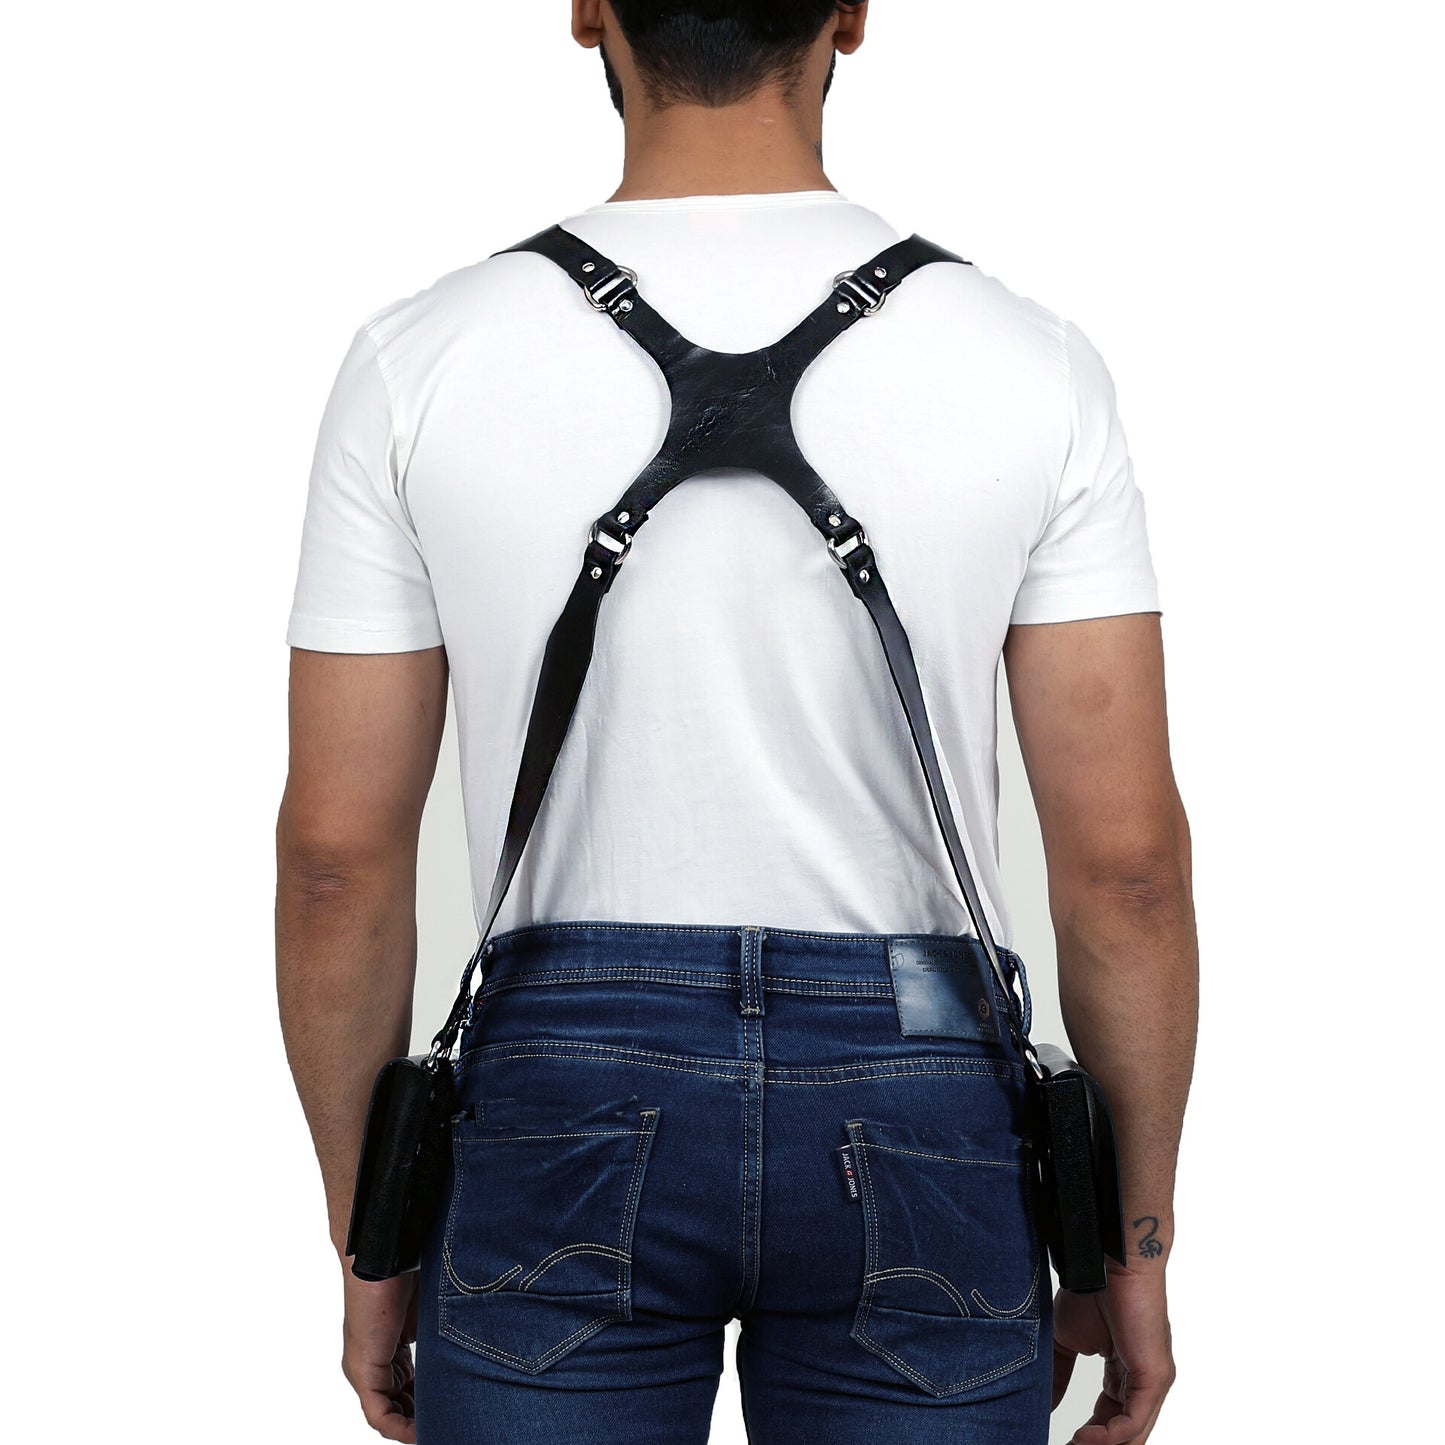 DUAL BAG LEATHER HARNESS - Subculture